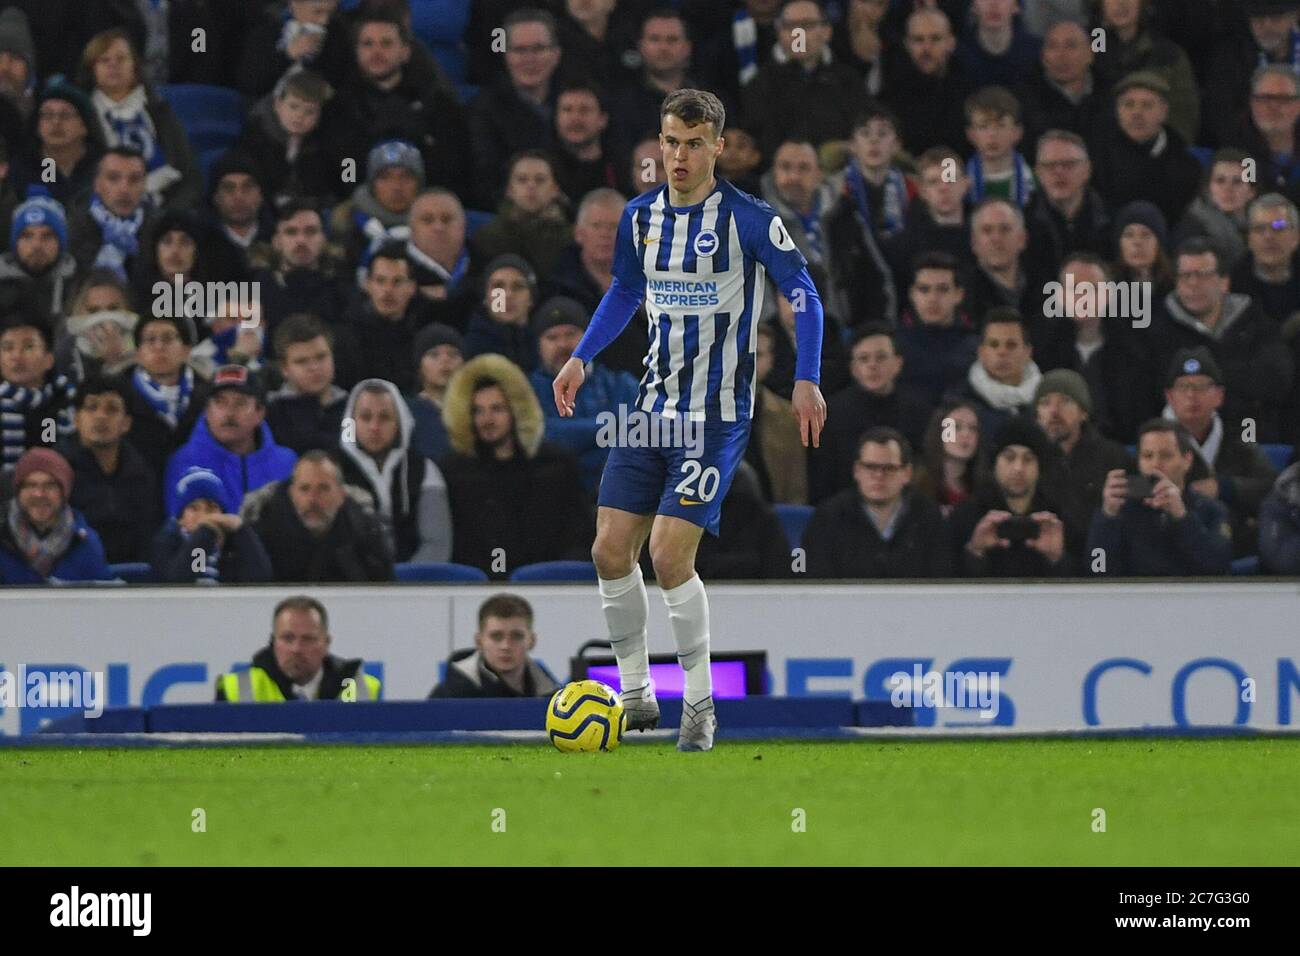 8th February 2020, American Express Community Stadium, Brighton and Hove, England; Premier League, Brighton and Hove Albion v Watford :Solly March (20) of Brighton & Hove Albion FC with the ball Stock Photo